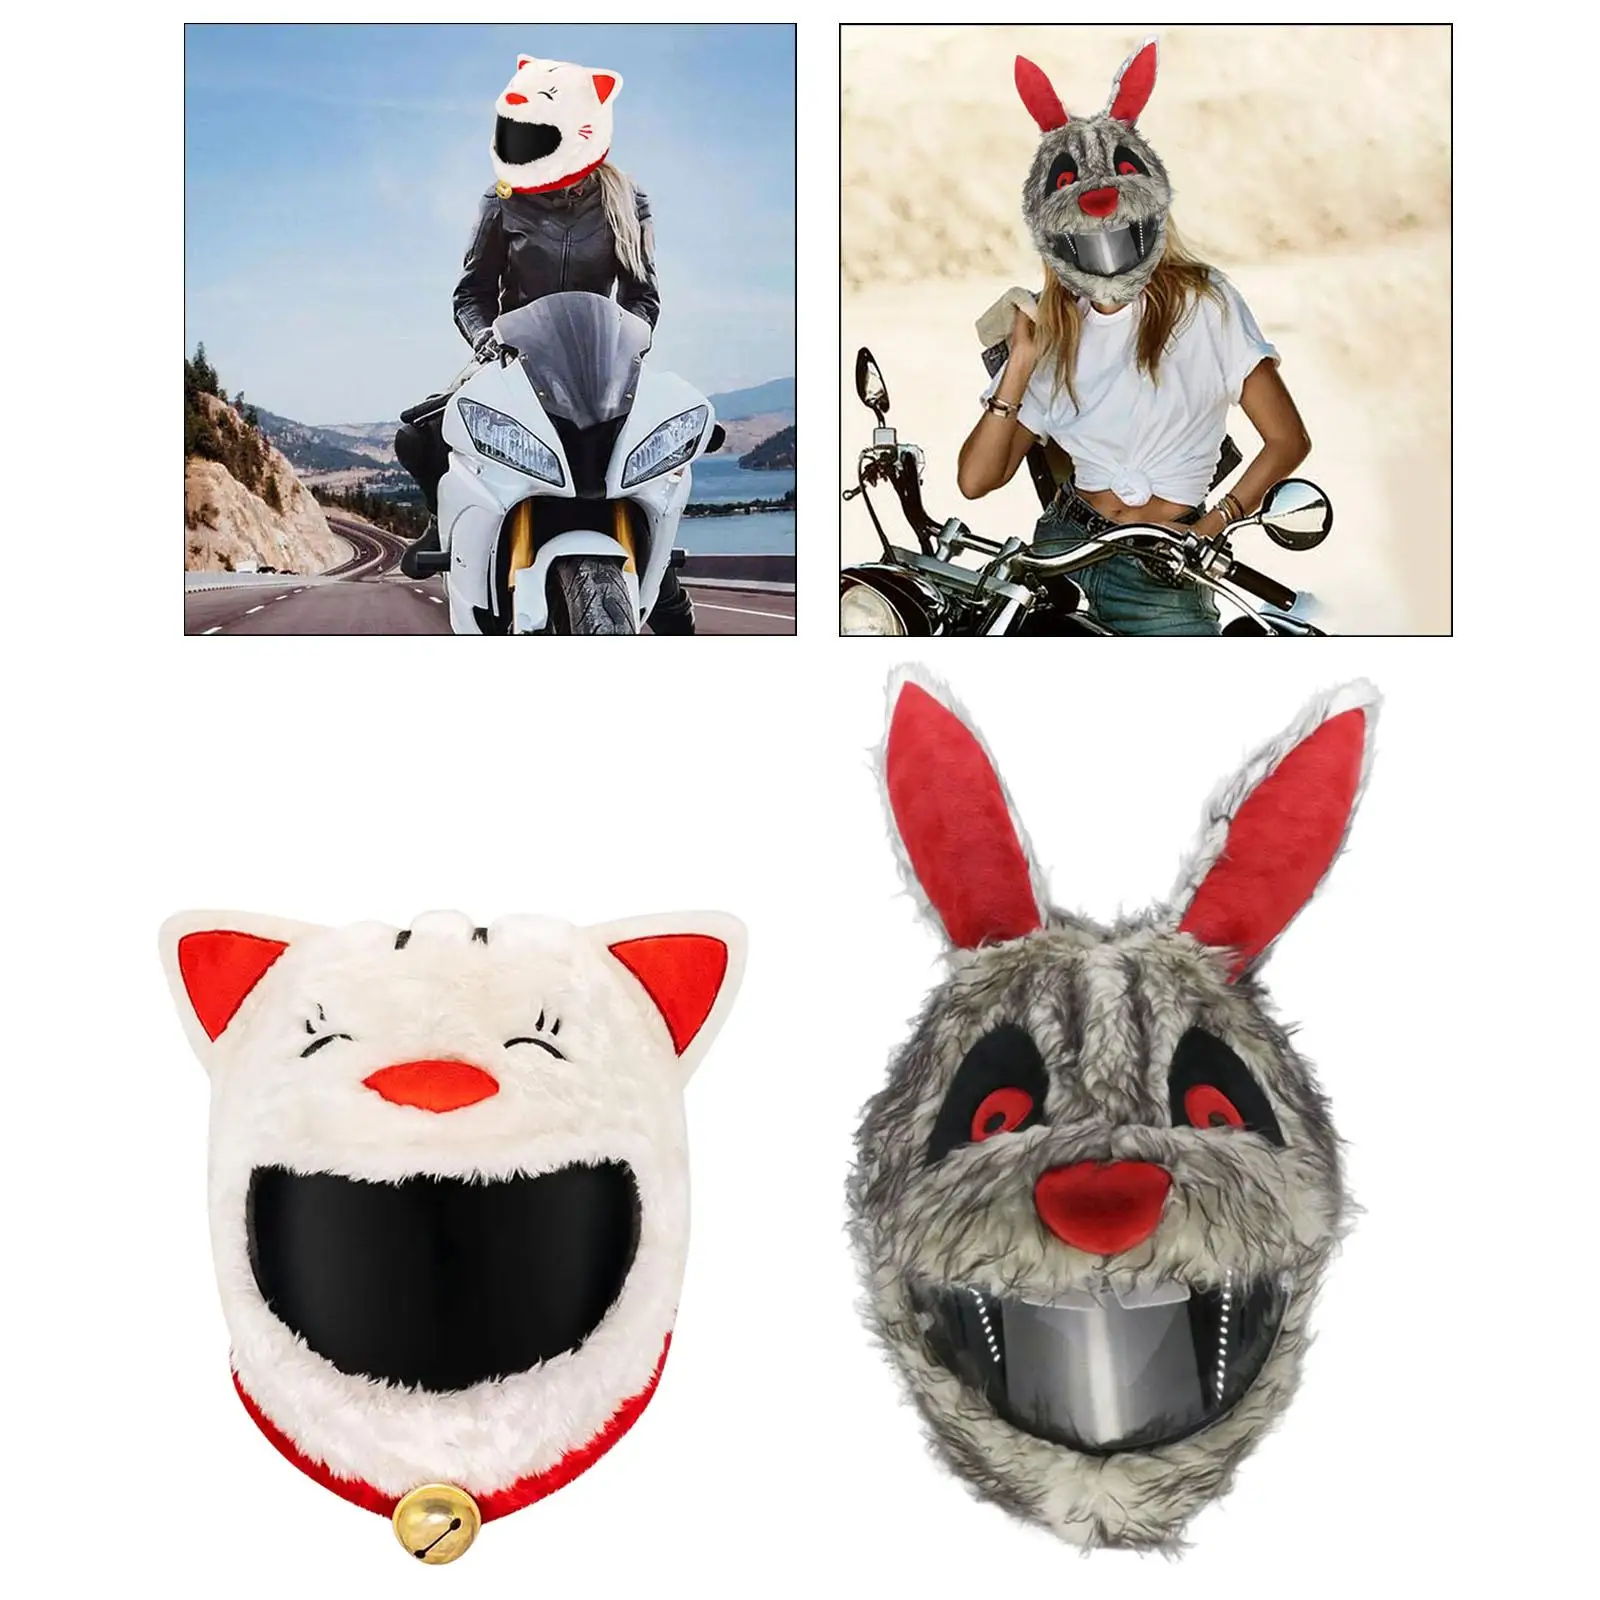 Christmas Motorcycle Helmets Cover Dust Cap Women Men Skiing Accessories Outdoor Xmas Helmets Hat Decoration Fun Rides Gifts